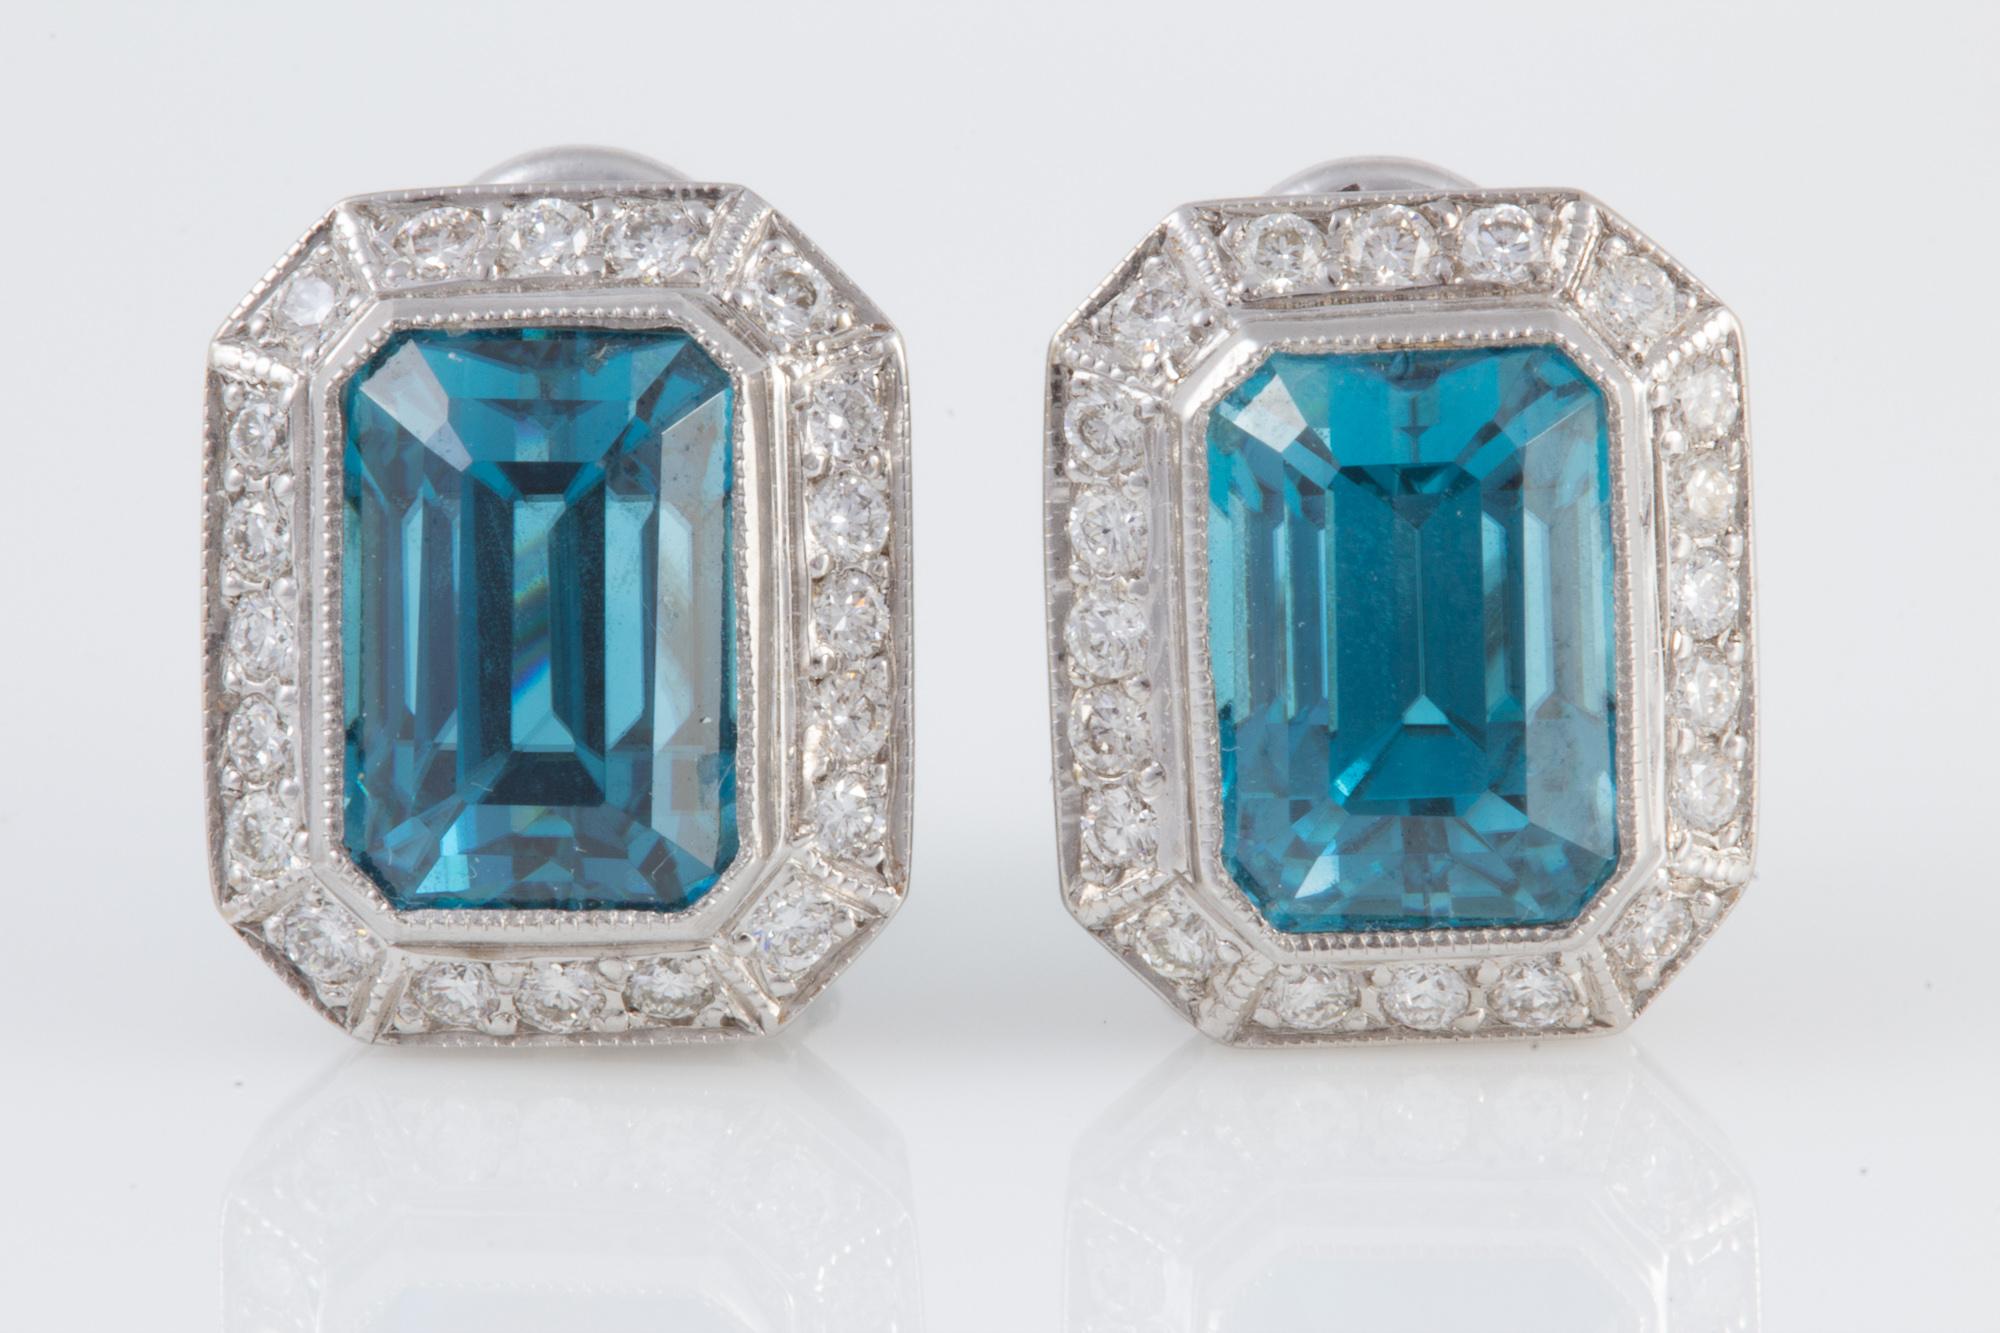 Cambodian Blue Zircon and Diamond Earrings Set in 18 Karat Gold and Platinum For Sale 3